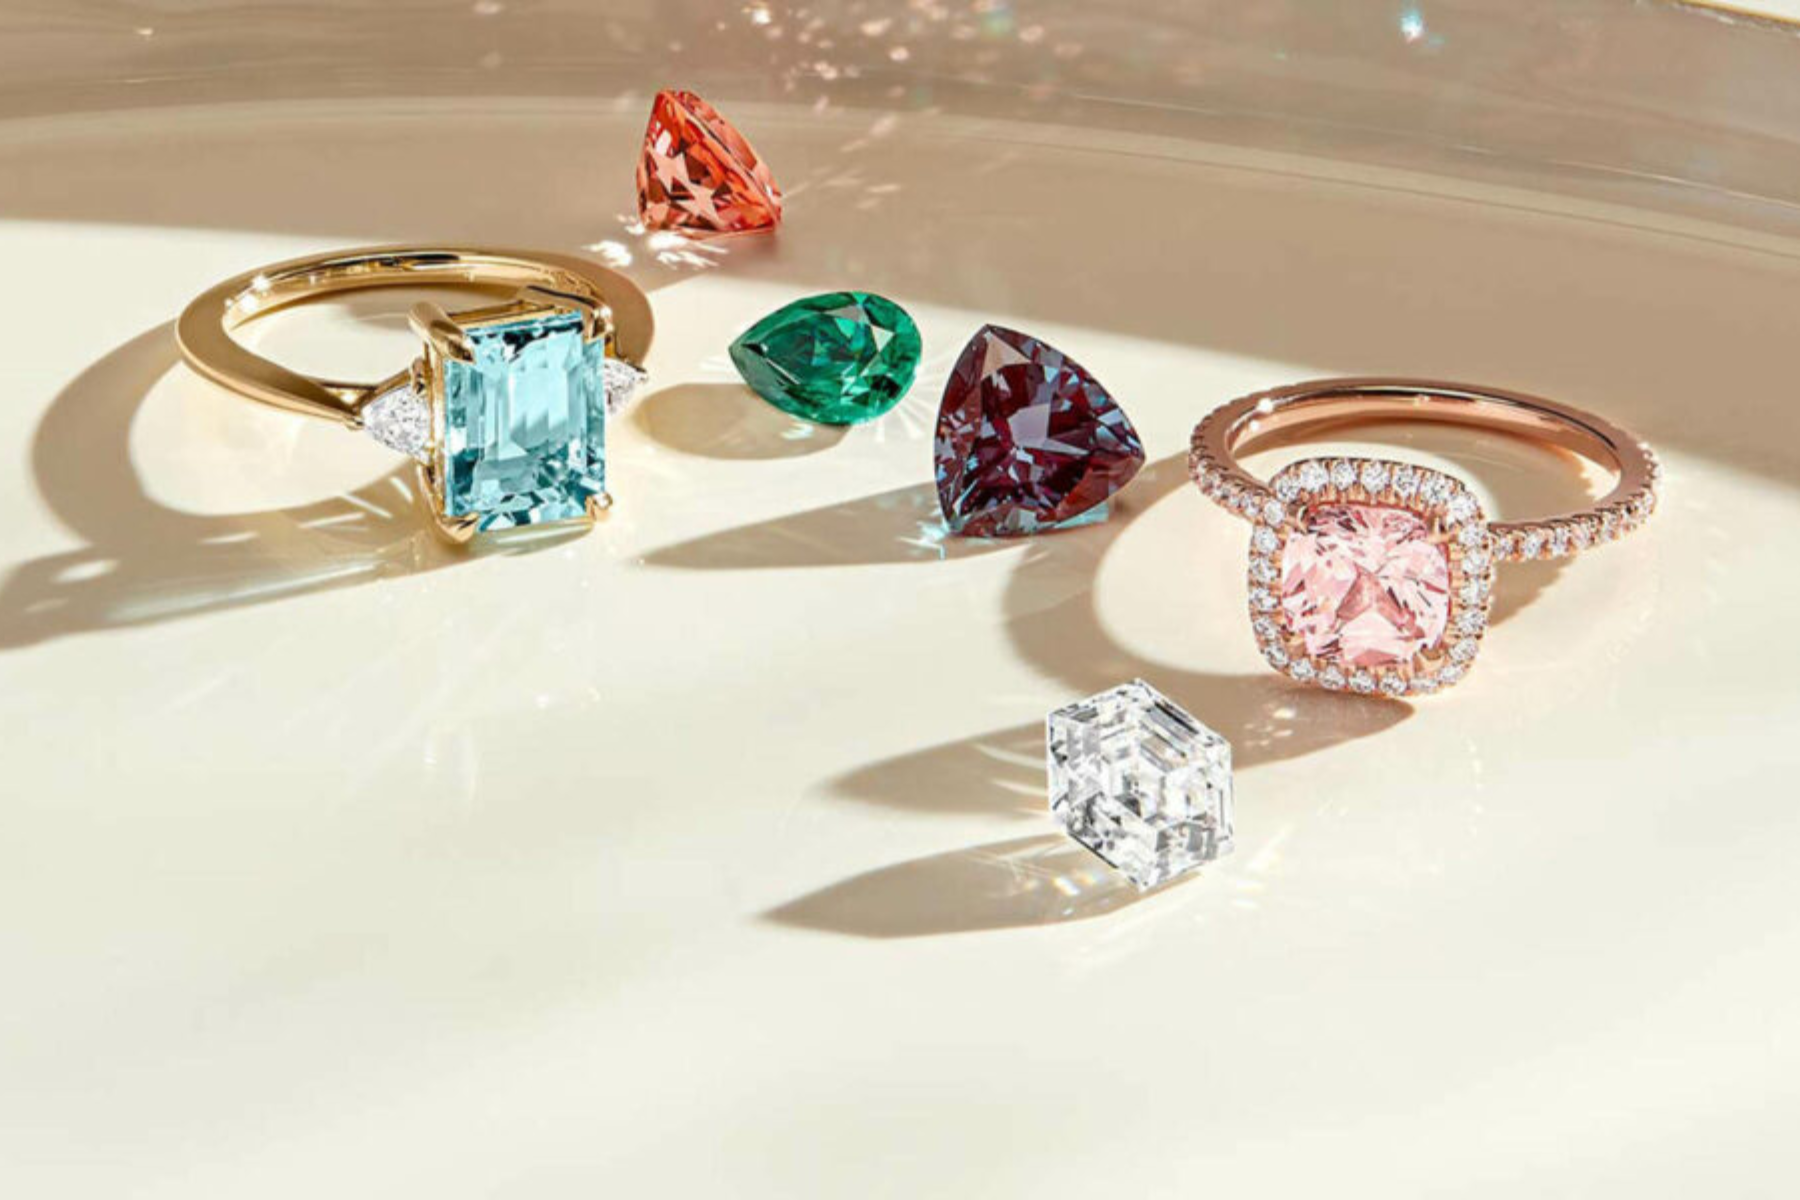 A photograph of two engagement rings, one with a blue gemstone and the other with a pink gemstone, both surrounded by four additional colored gemstones